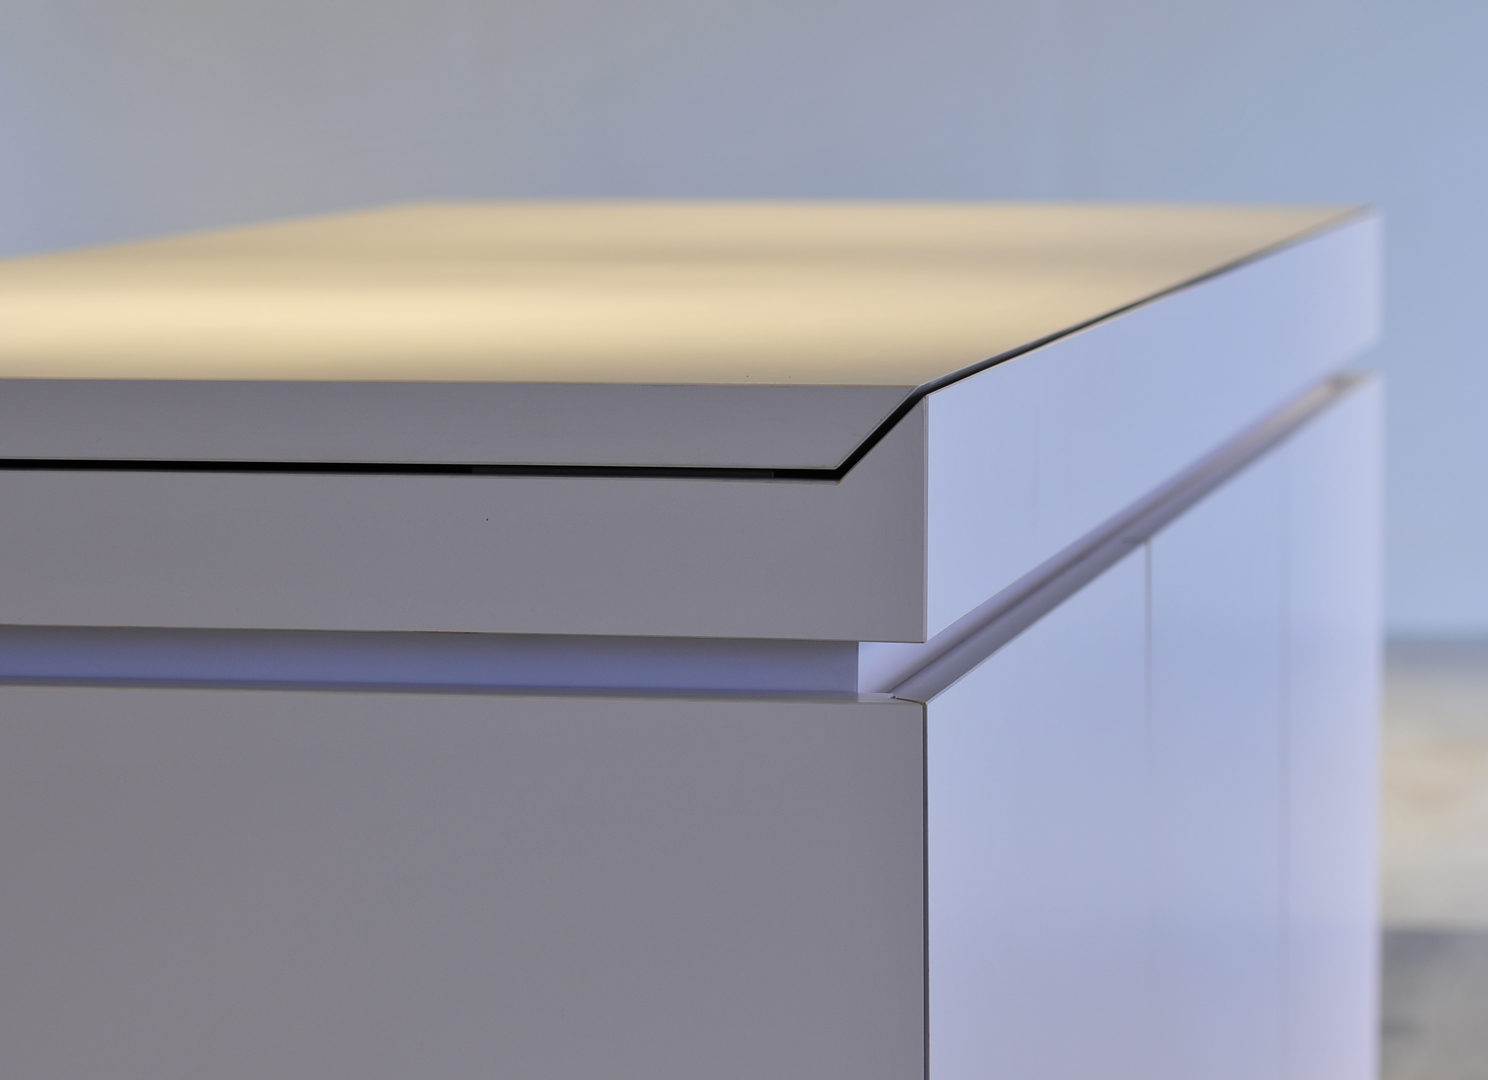 Strato_design_SEMPLICE#2_kitchen island with sliding worktop_Stratocolor white_mat stainless steel_03